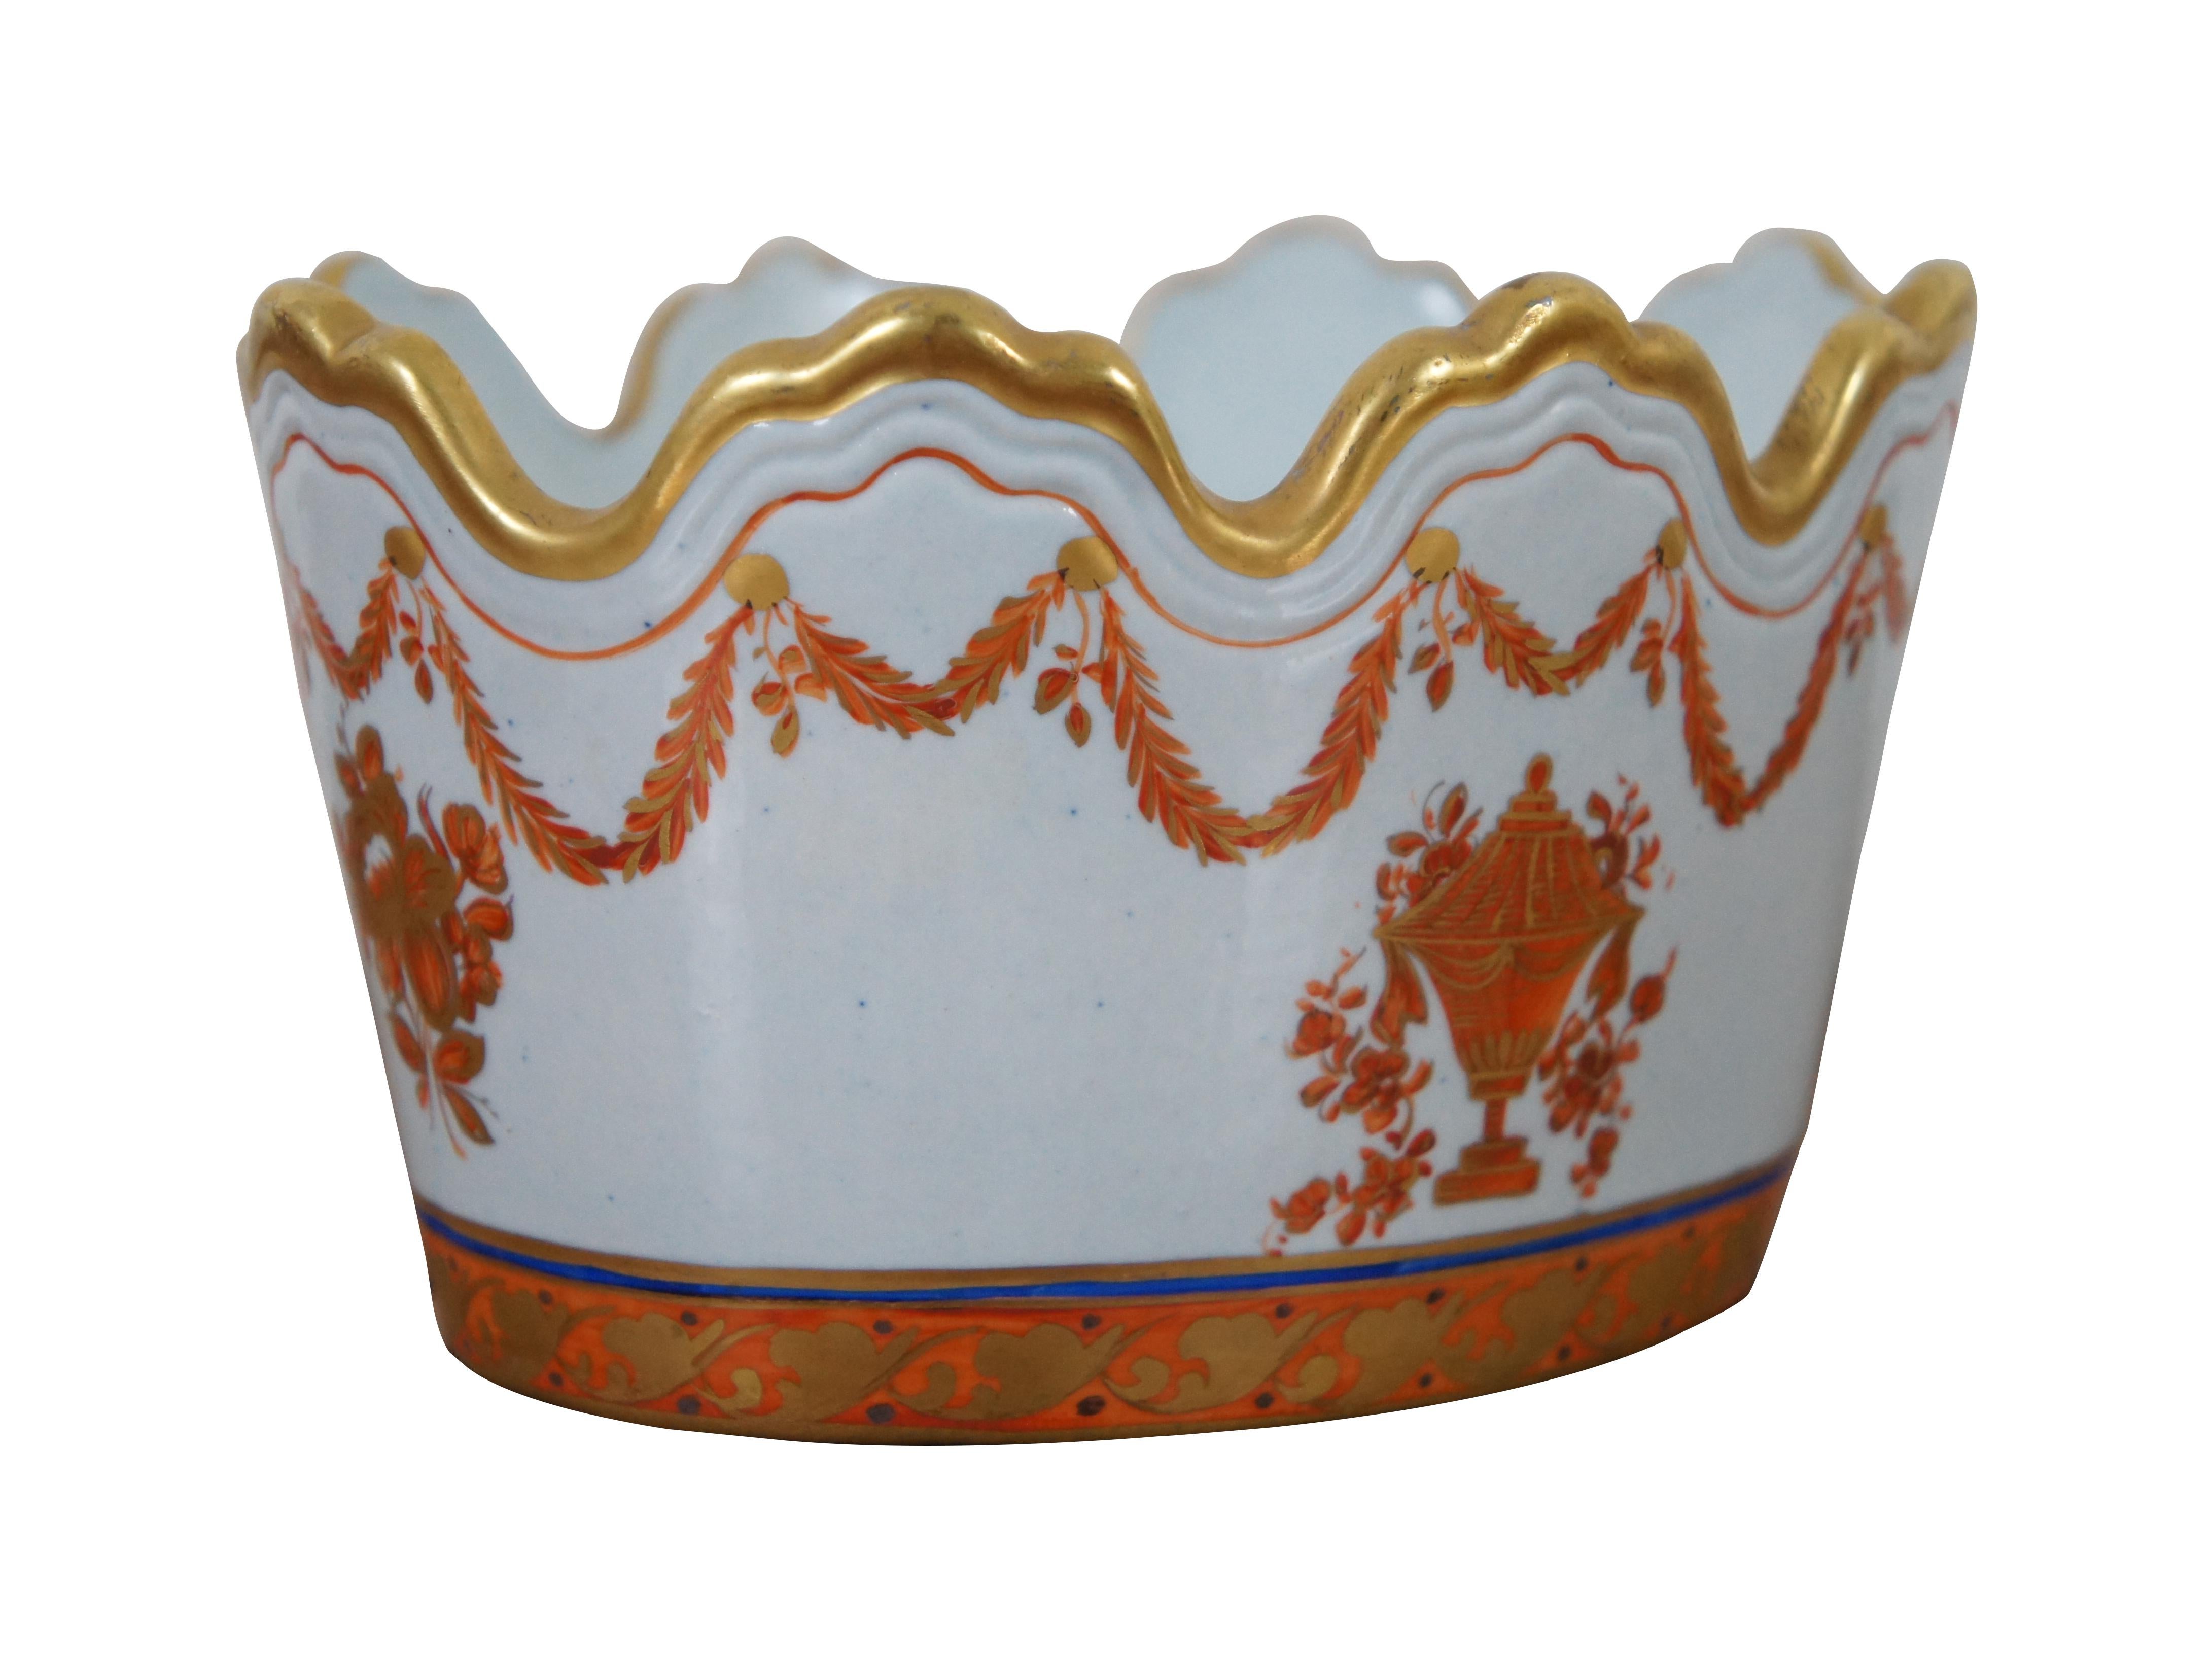 Neoclassical Mottahedeh Lowestoft Monteith Porcelain Scalloped Candy Nut Bowl Cachepot